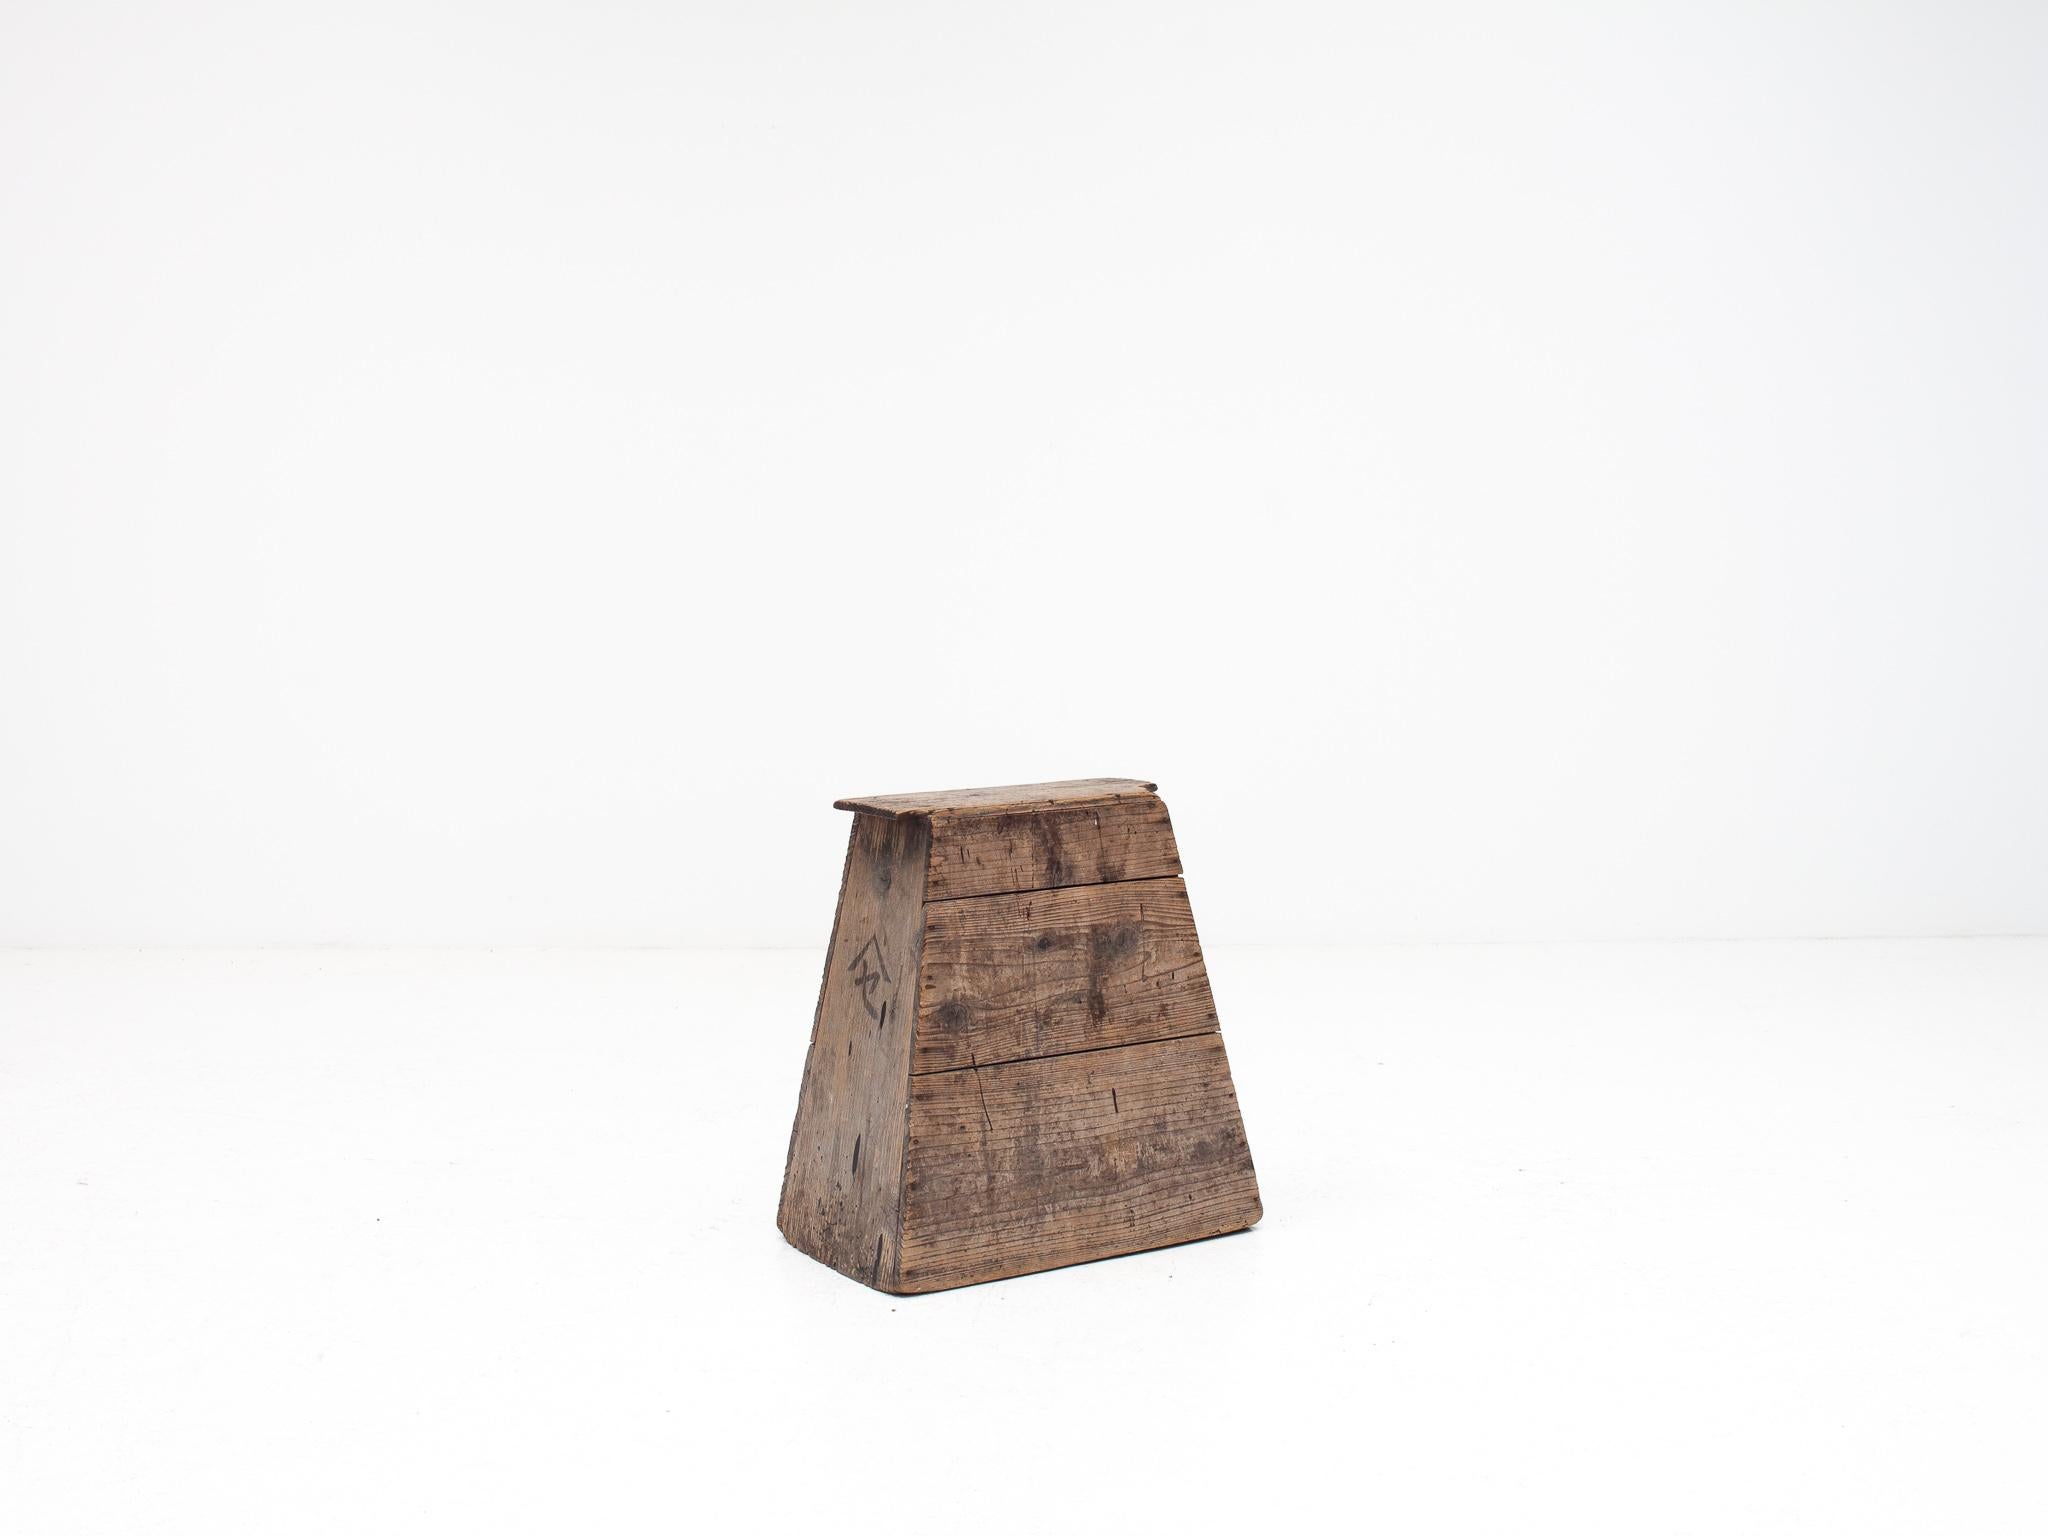 A most probably Meiji/Taisho period street vendor stool, constructed of 
cedar timbers.  Originating from Japan and dating from the early 1900s with handpainted Japanese text characters.

Befitting of interiors that blend pieces of different styles